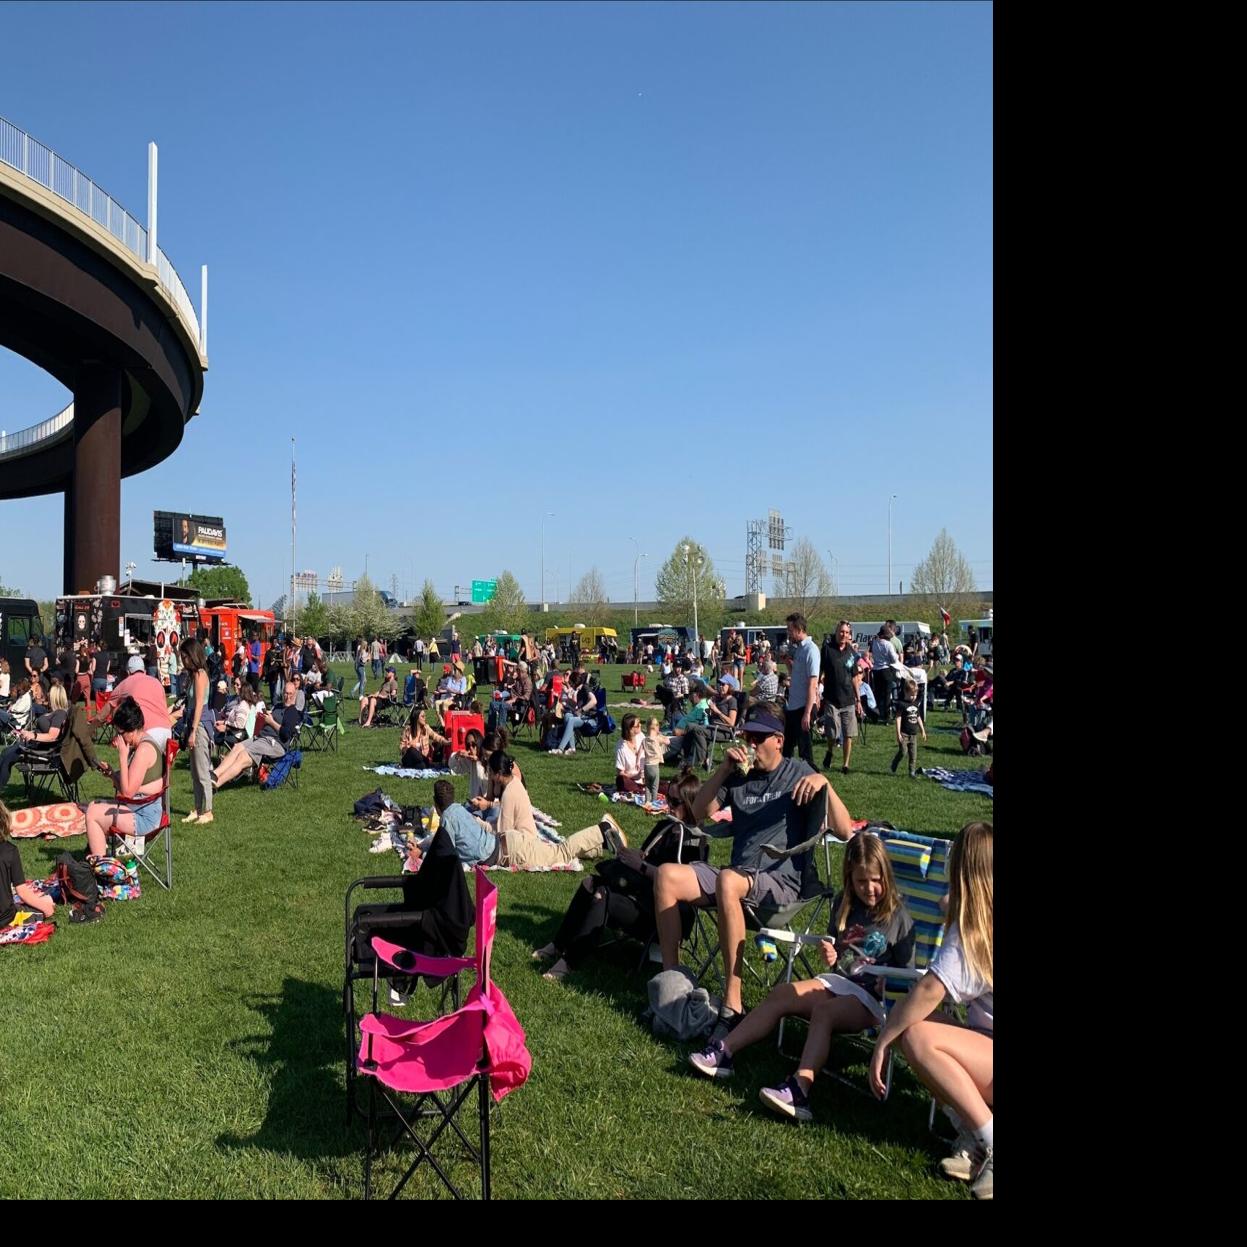 Waterfront Wednesdays expected to return late summer, organizers say